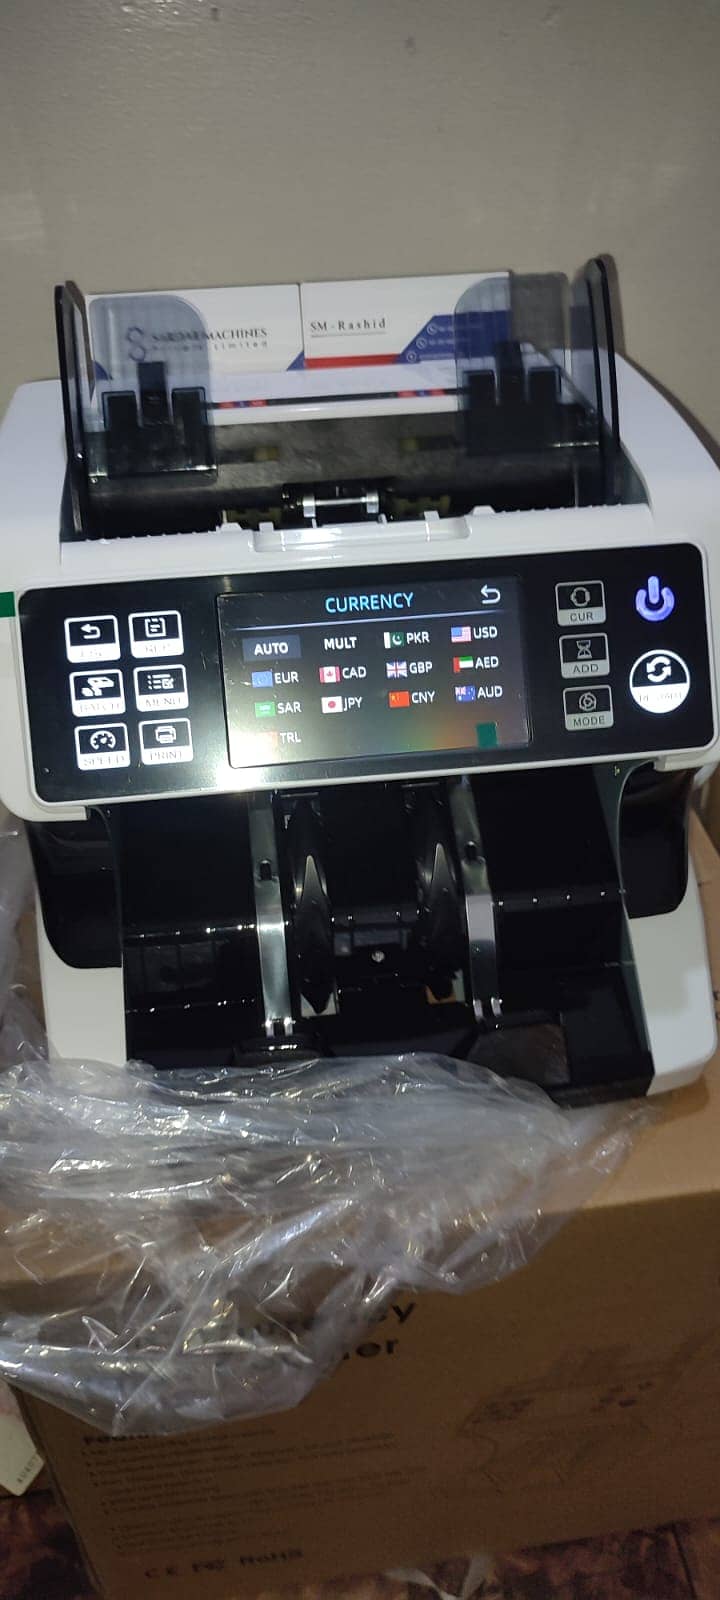 Cash currency note bill counting machine in Pakistan with fake note de 6